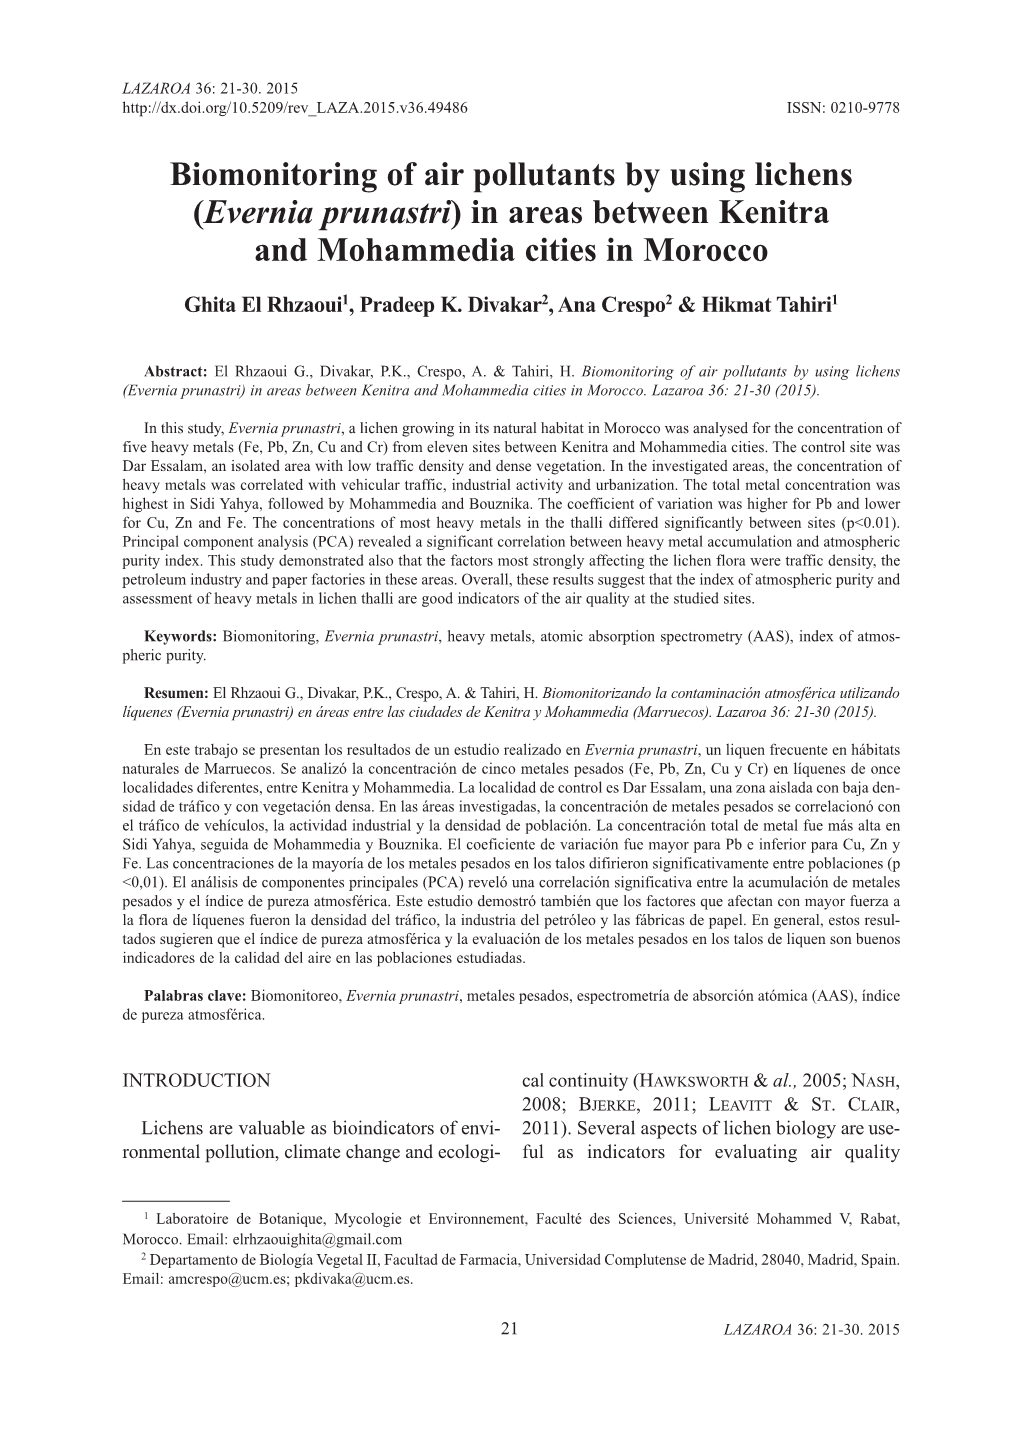 Biomonitoring of Air Pollutants by Using Lichens (Evernia Prunastri) in Areas Between Kenitra and Mohammedia Cities in Morocco